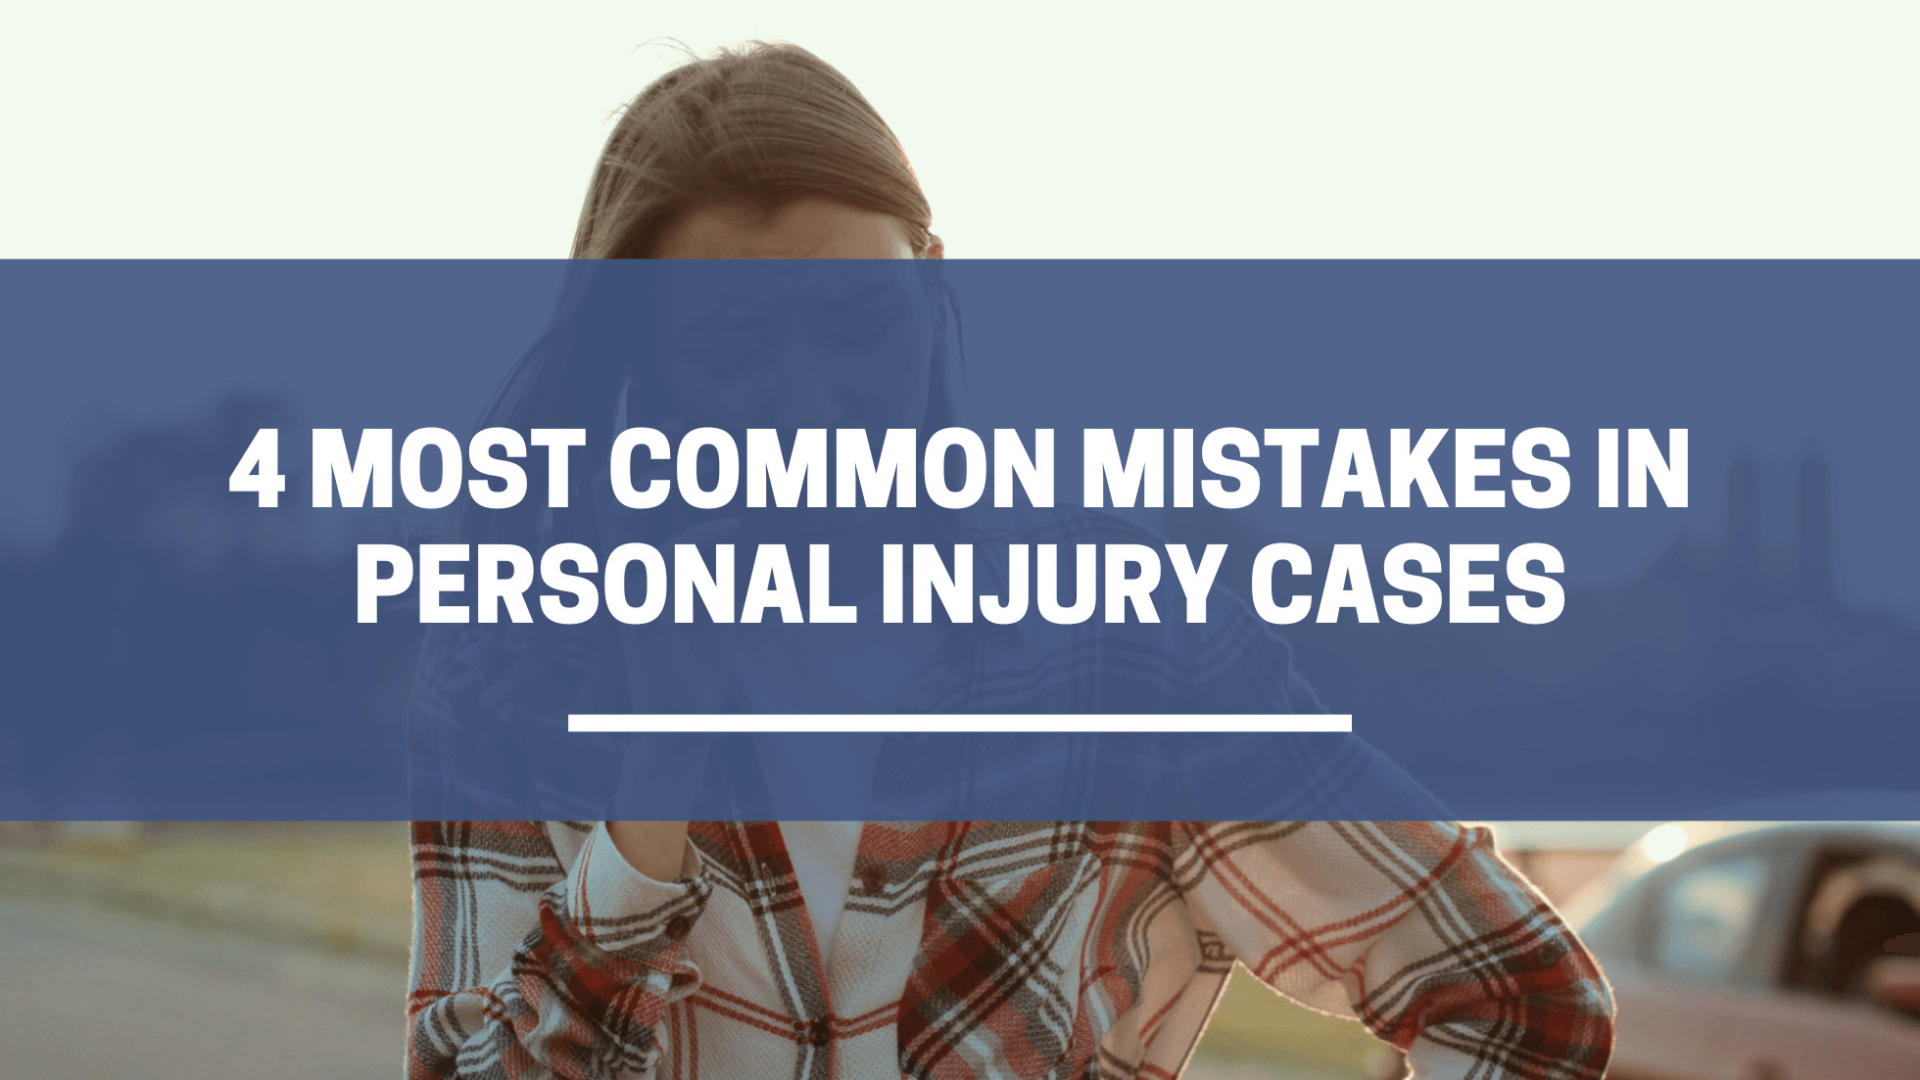 4 MOST COMMON MISTAKES IN PERSONAL INJURY CASES